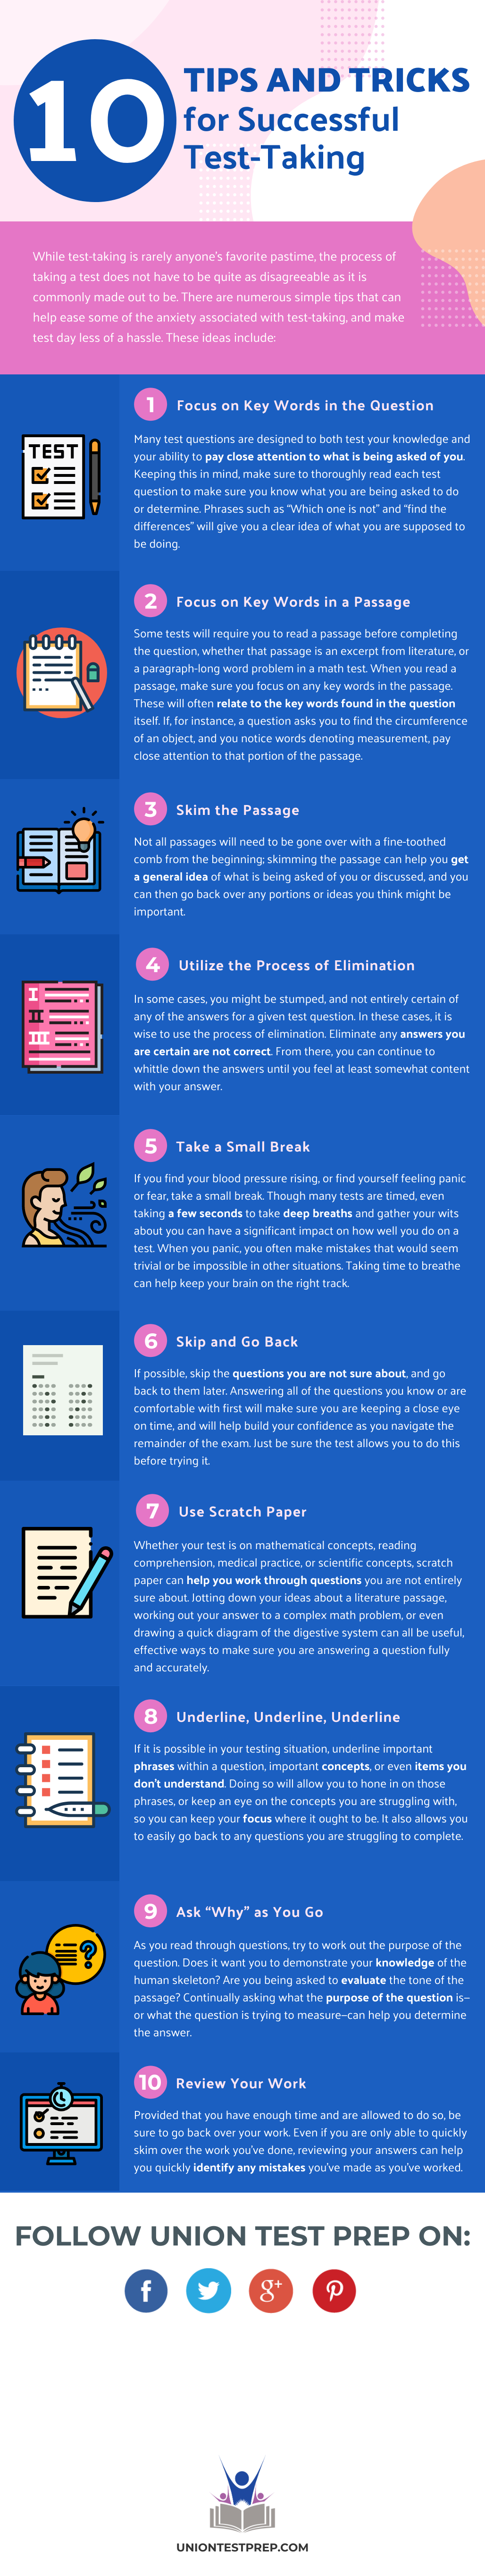 10 Tips for Successful Test Taking